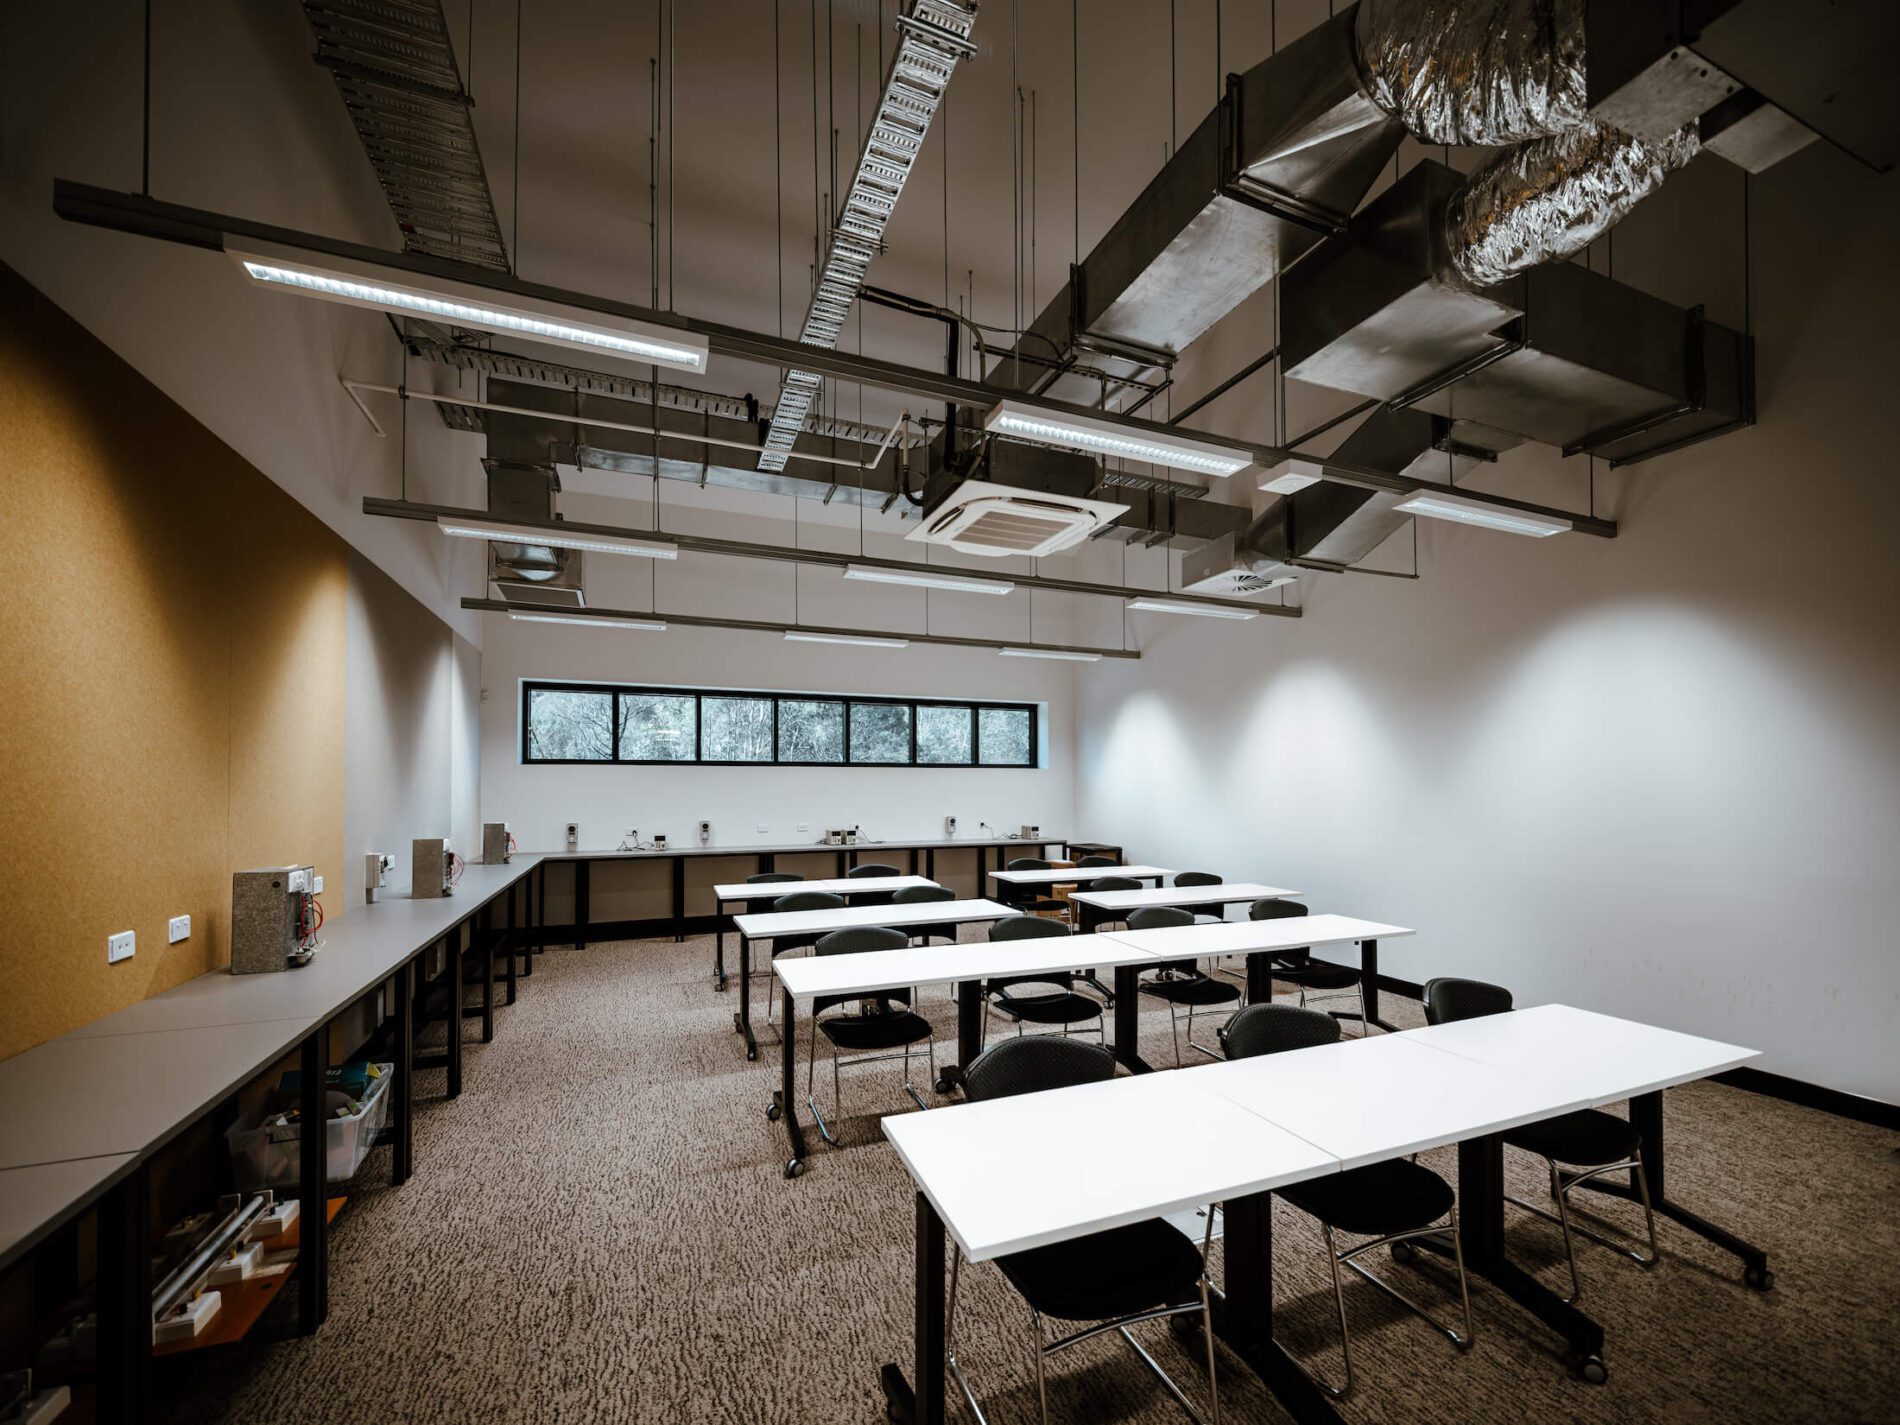 Classroom with coffee machines and tables and chairs in industry training facility.